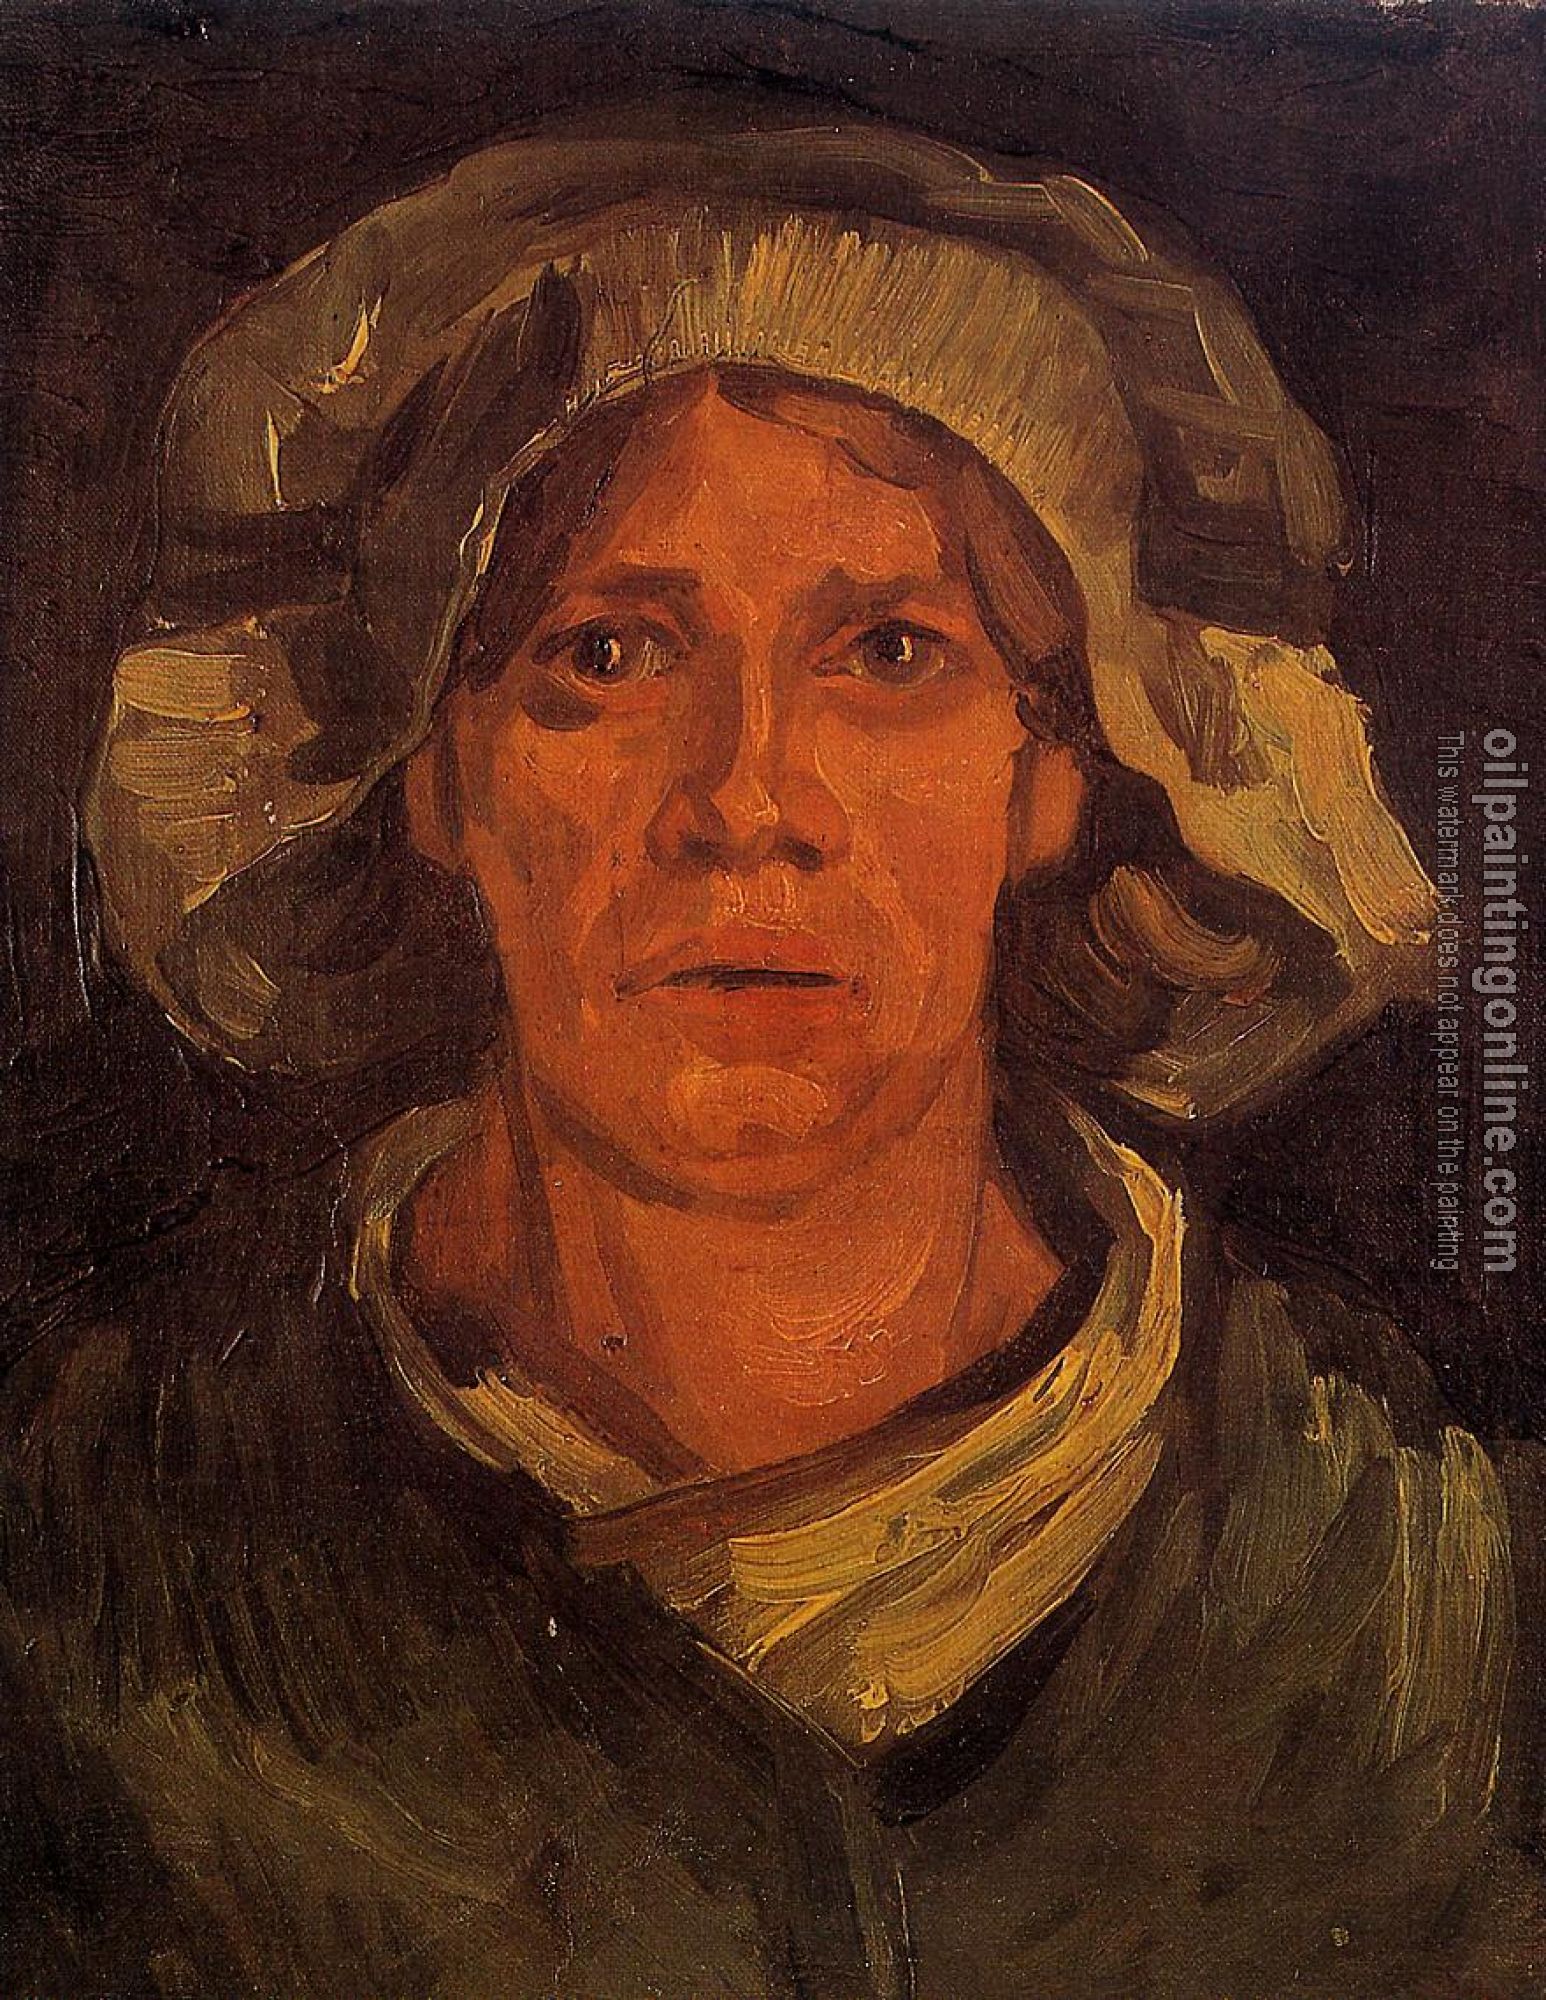 Gogh, Vincent van - Head of a Peasant Woman with White Cap